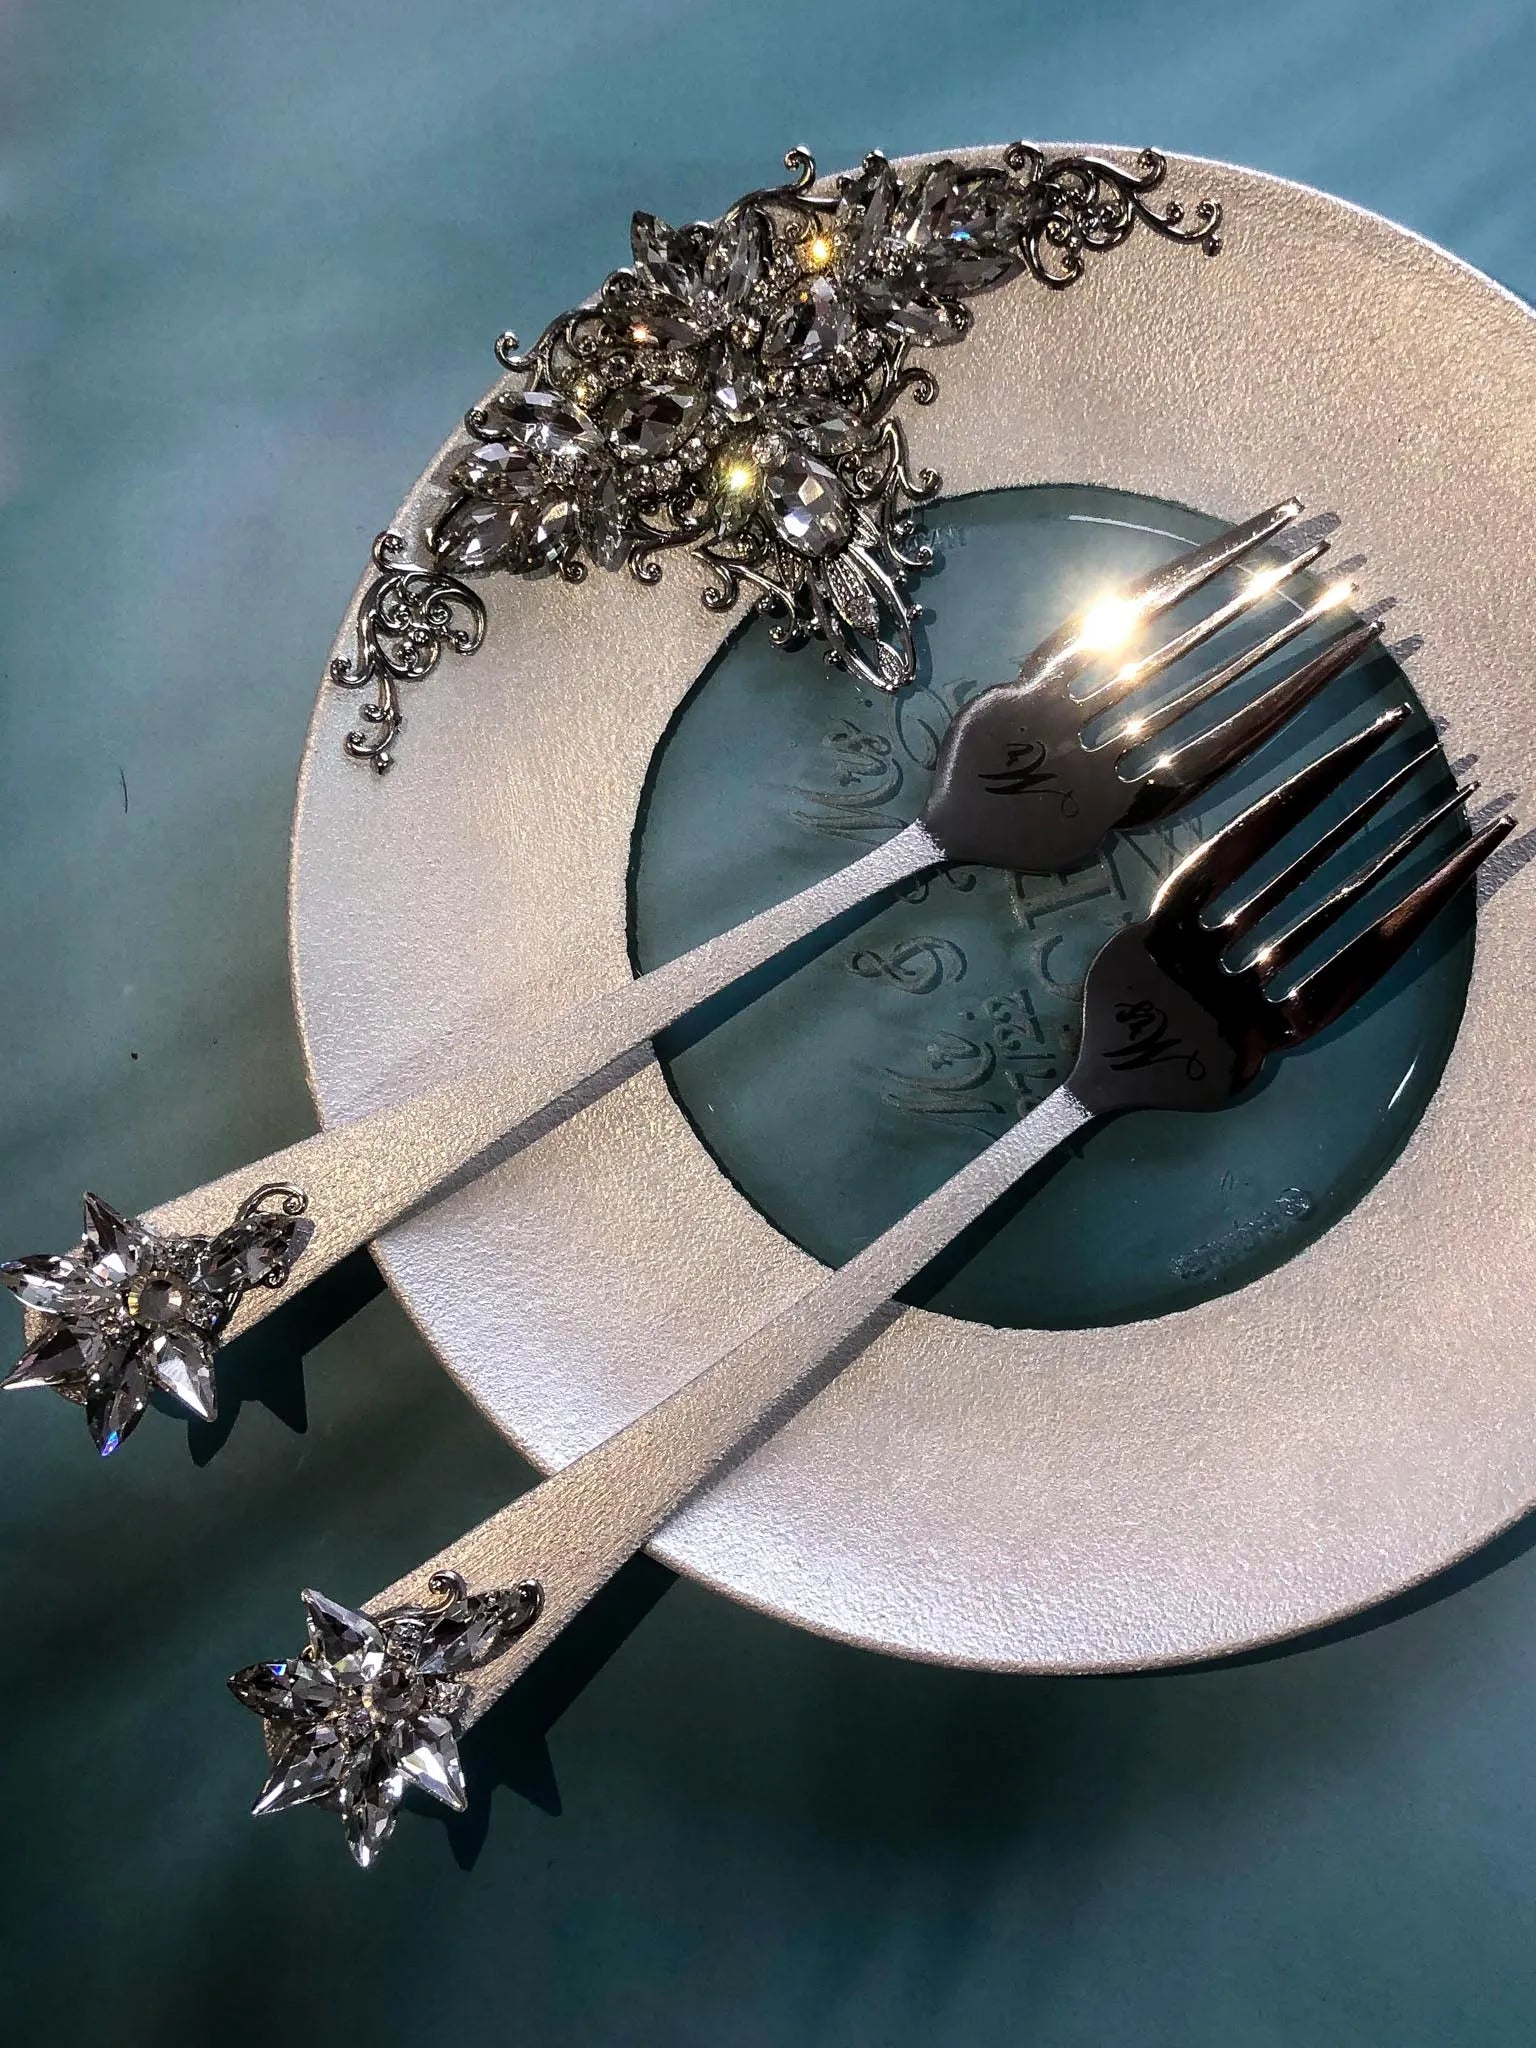 ilver Crystals Engraved Wedding Dessert Forks and Plate Set - Gloria - diamoreds